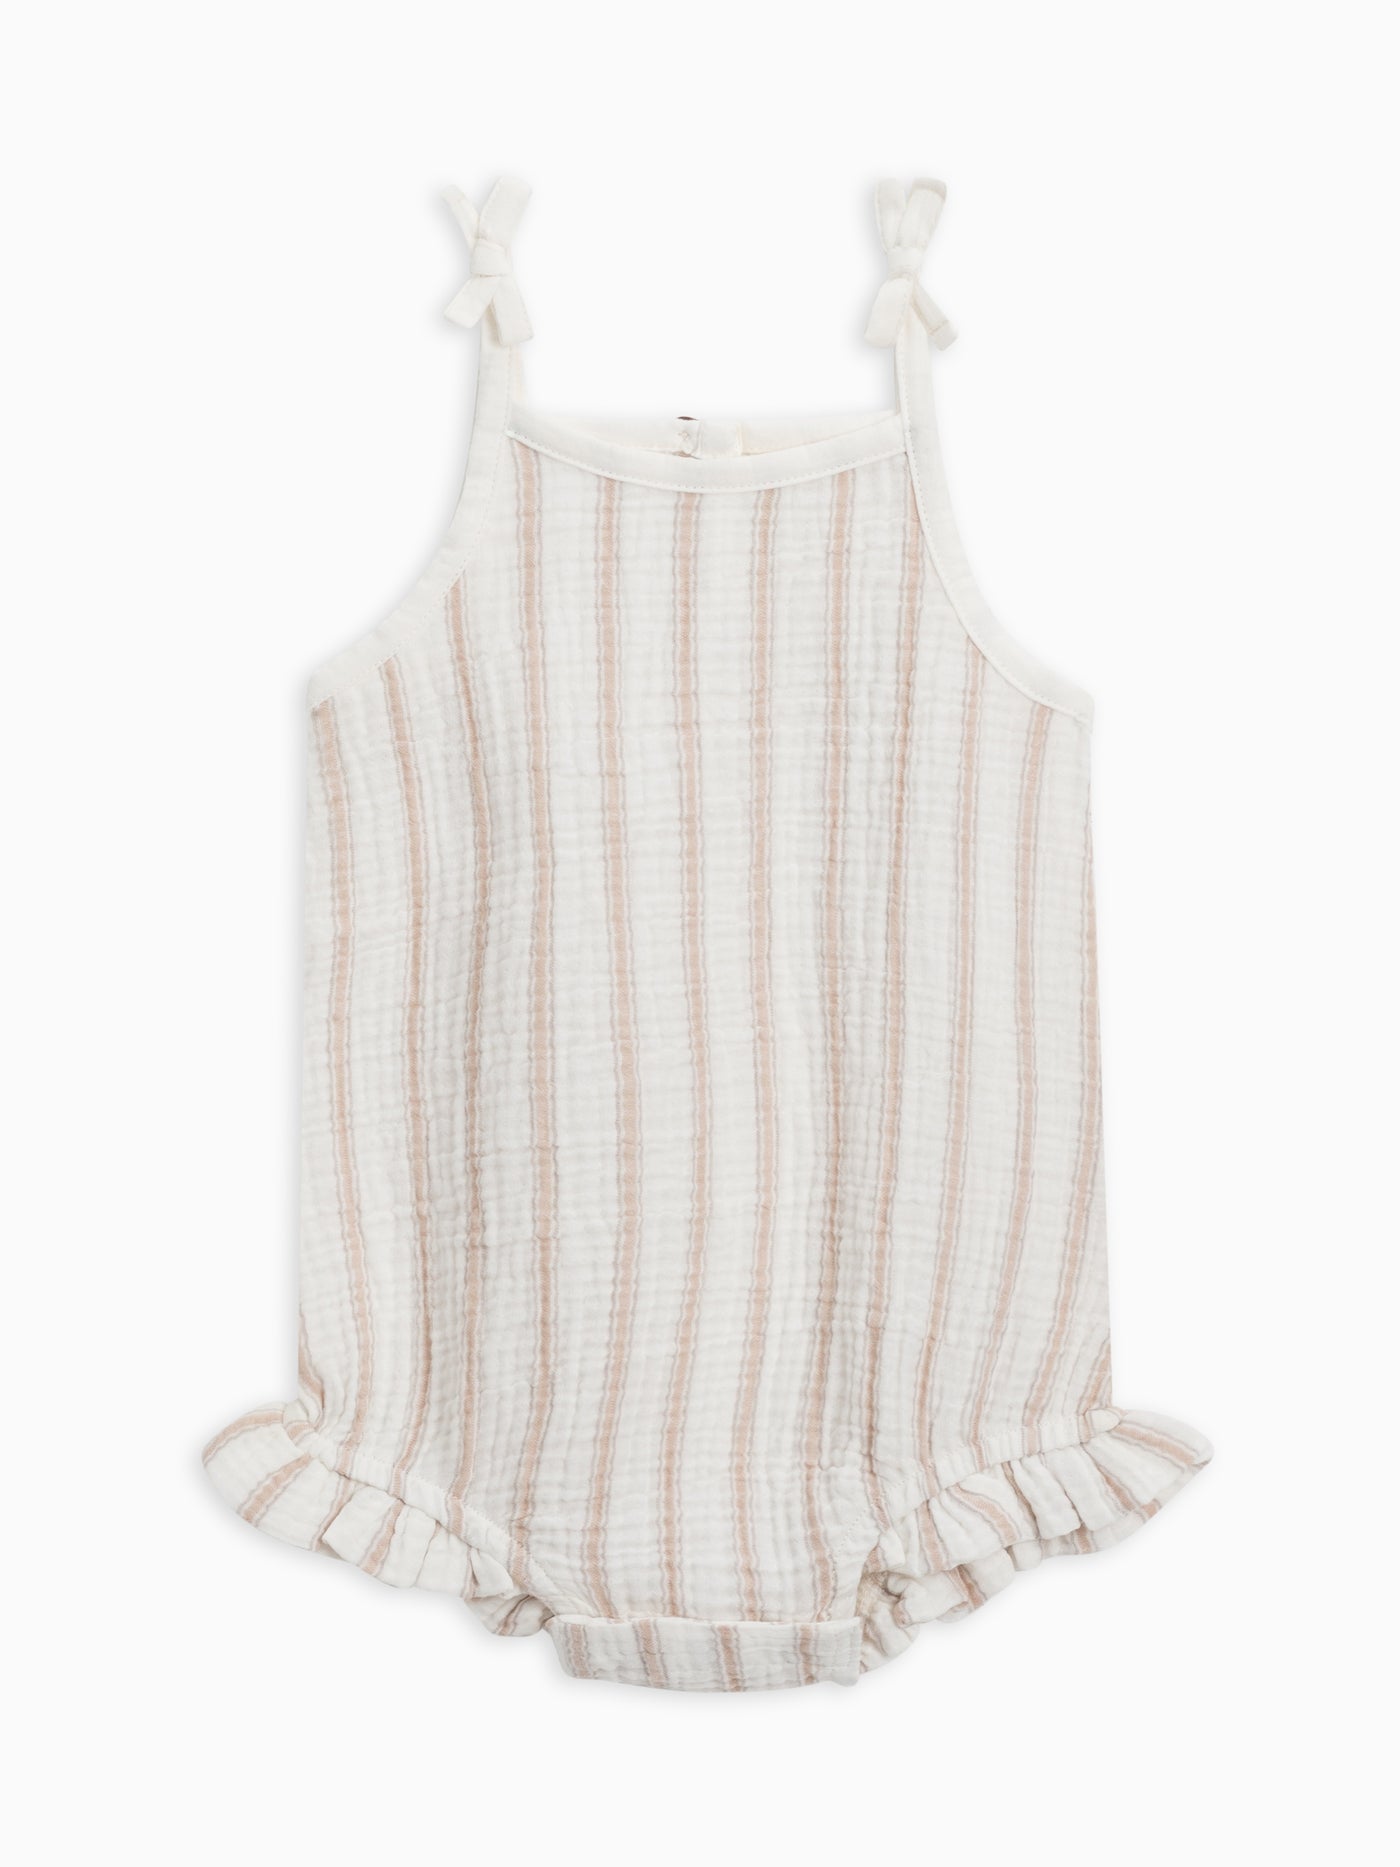 ada ruffle tank romper by colored organics - The cutest bubble romper is here just in time for warmer weather! To keep getting dressed easy, the romper has an adorable wooden button keyhole closure, faux bows, and snap closures on the bottom. 100% organic cotton muslin